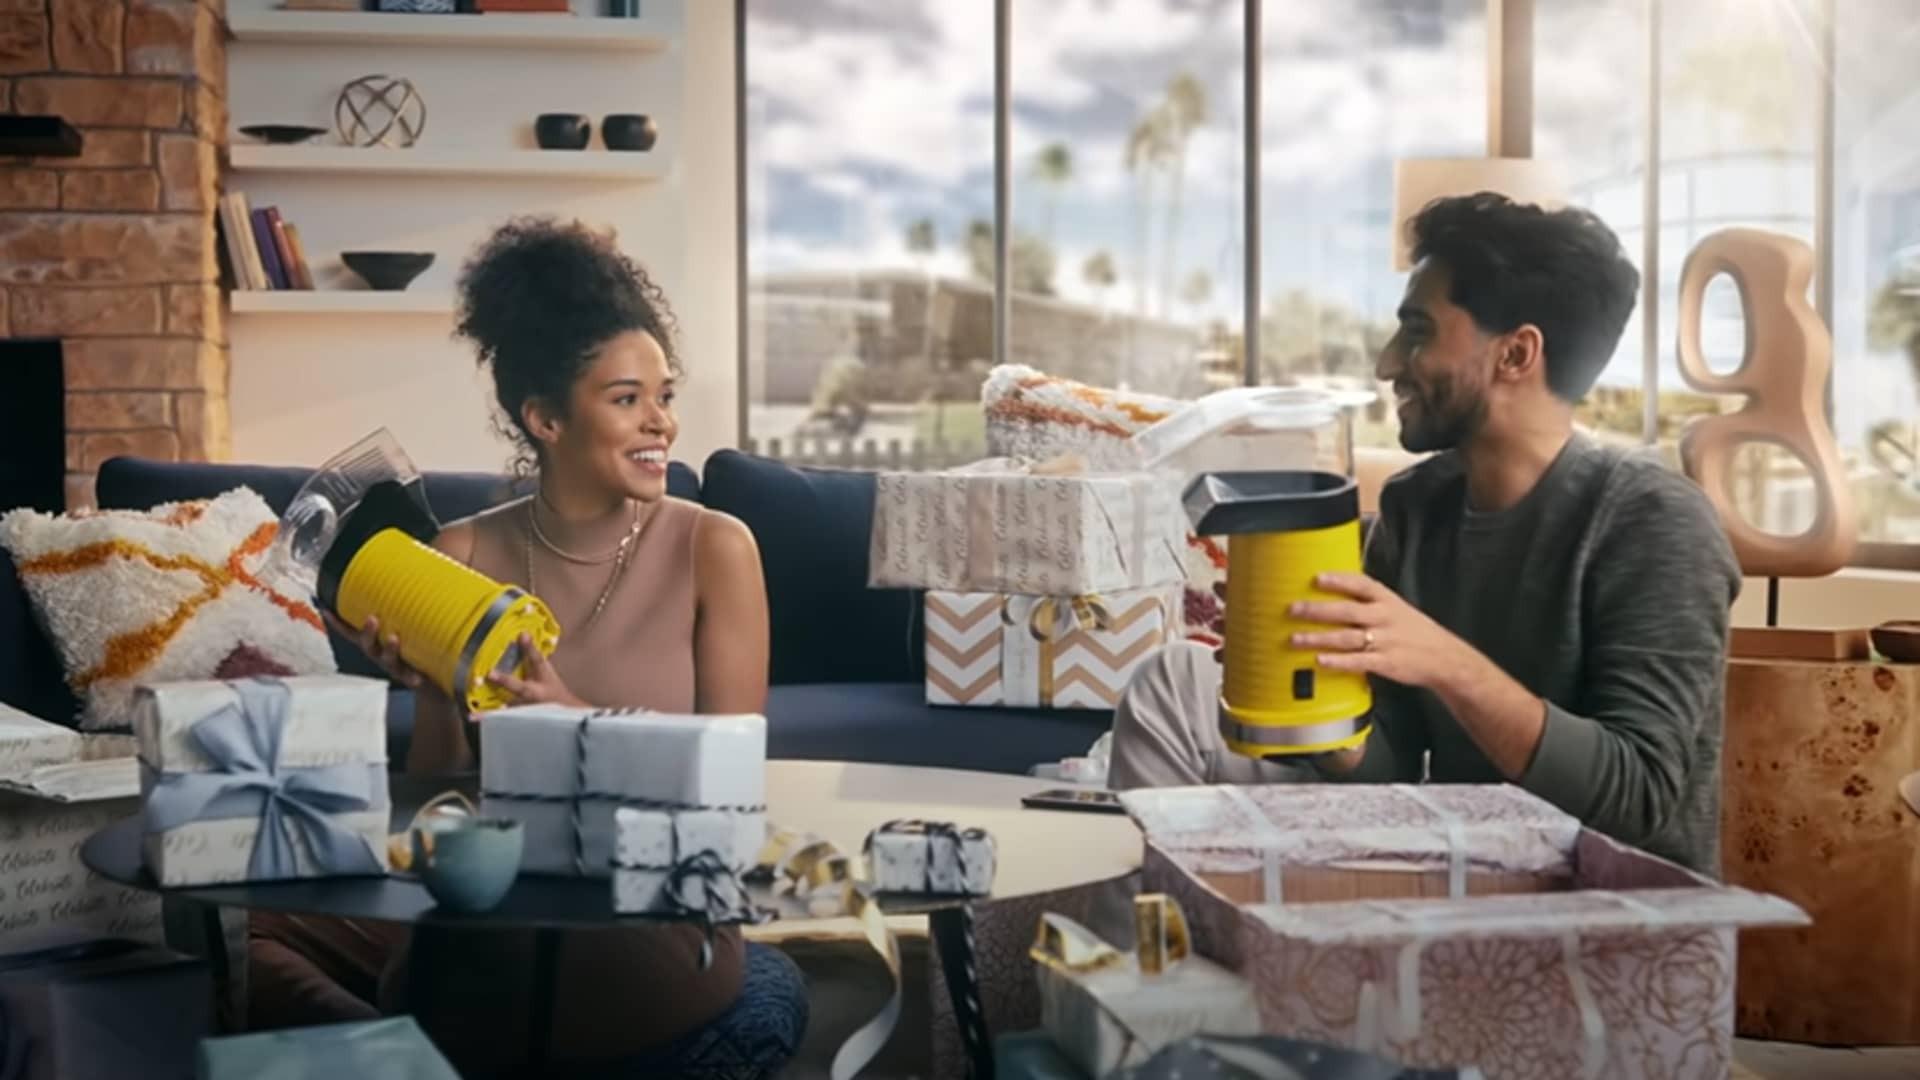 Super Bowl will some new advertisers that had great year during